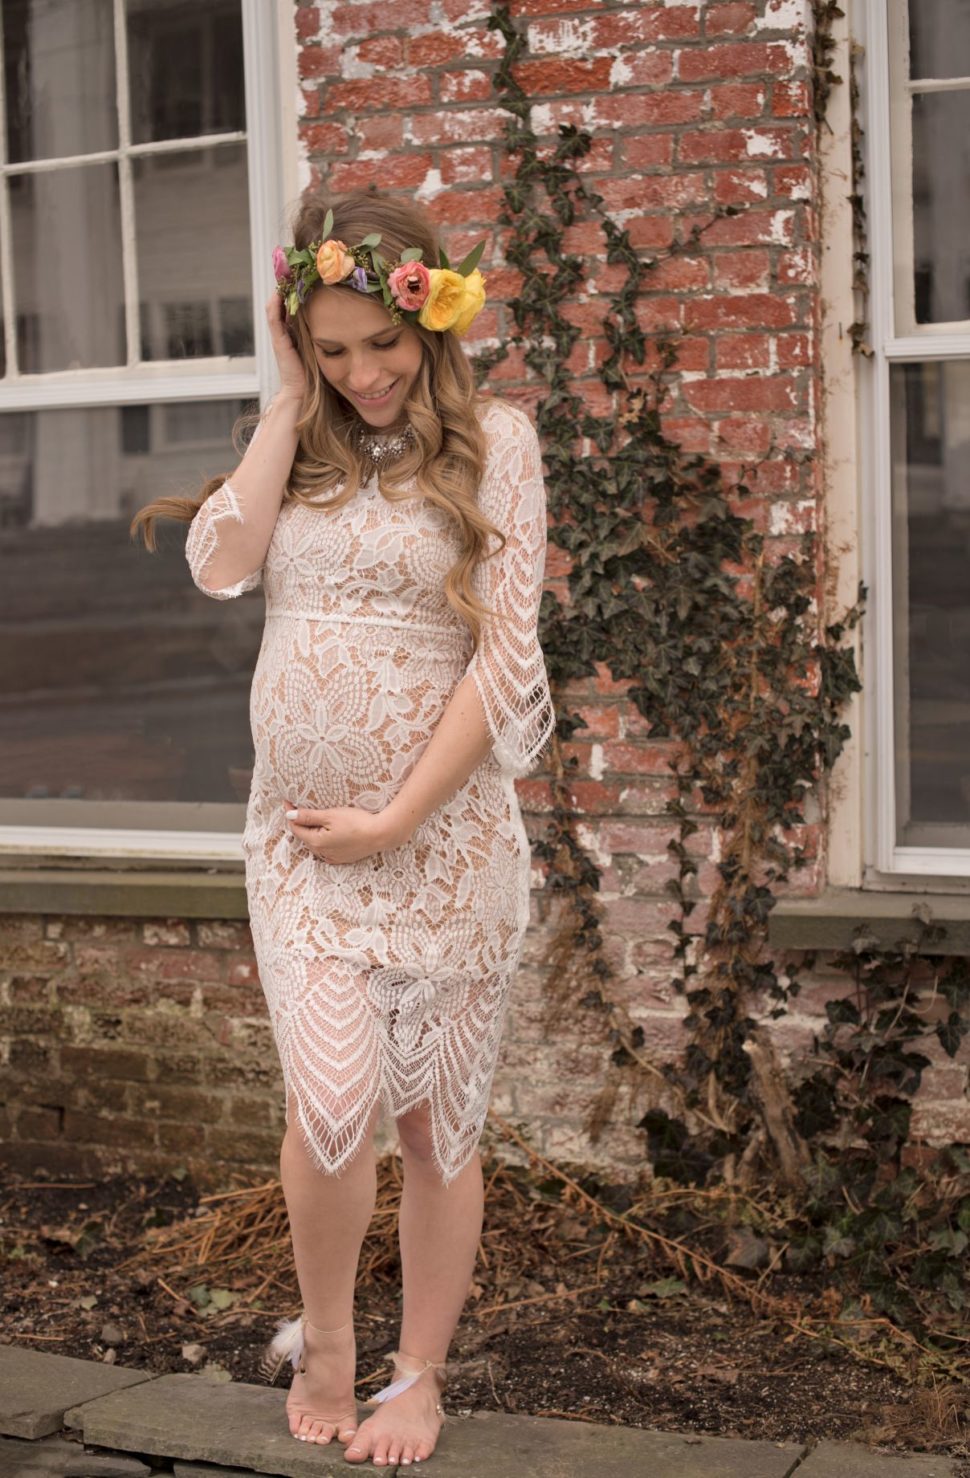 Medium Size of Baby Shower:maternity Boutique Cute Maternity Dresses For Baby Shower Affordable Maternity Dresses For Baby Shower What To Wear To My Baby Shower Baby Shower Dresses Cute Inexpensive Maternity Clothes Maternity Evening Gowns Plus Size Maternity Dresses For Baby Shower